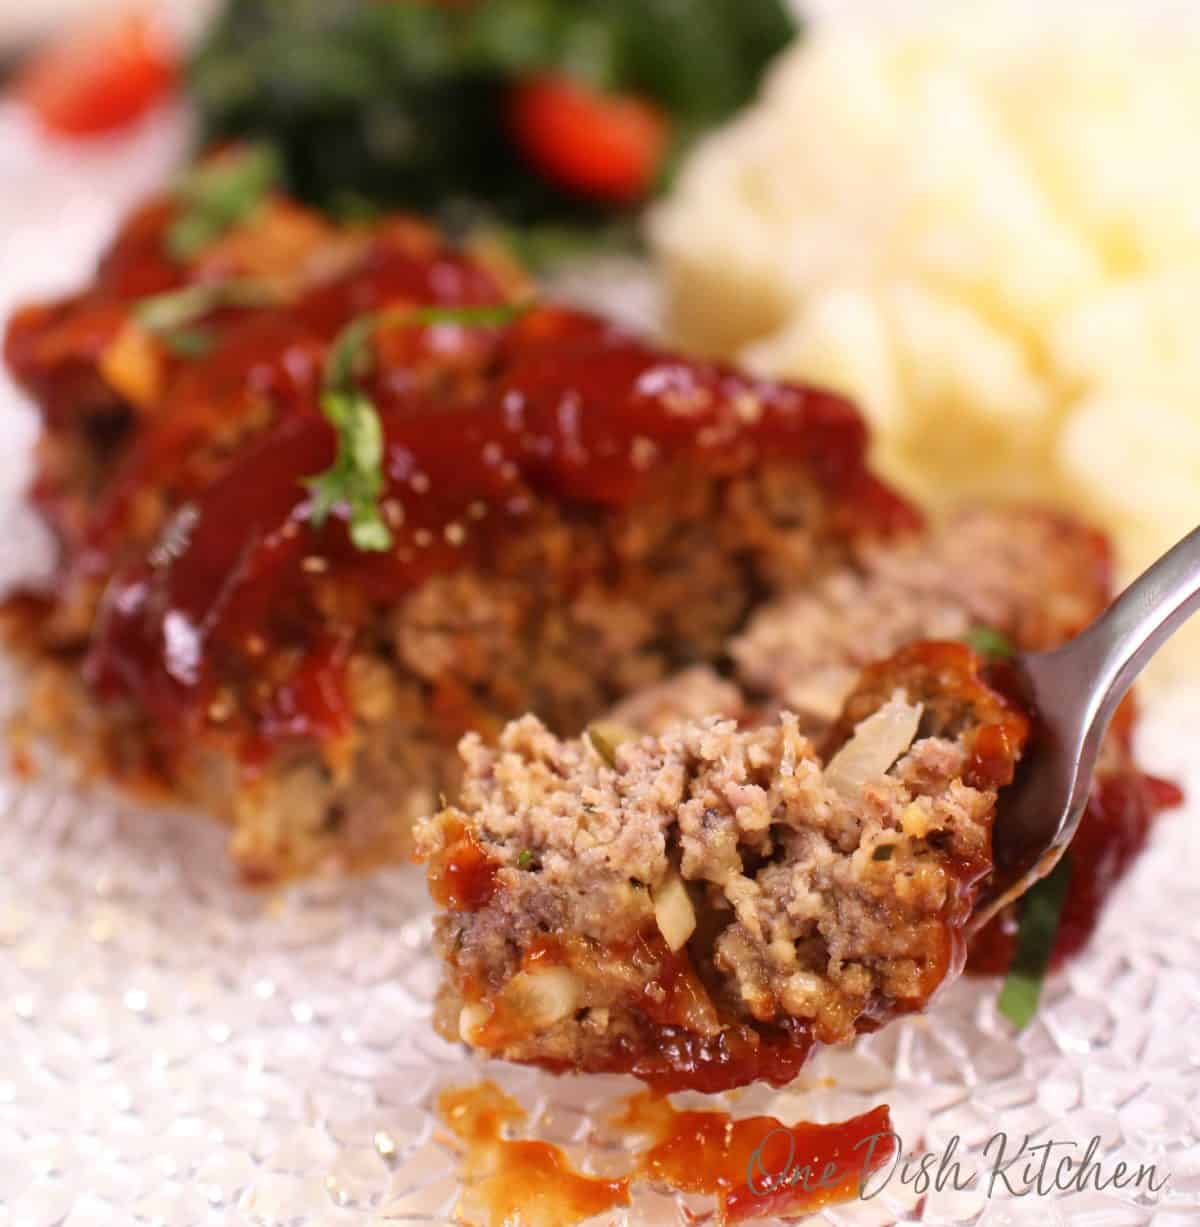 A forkful of meatloaf from a plate with mashed potatoes and a side salad.